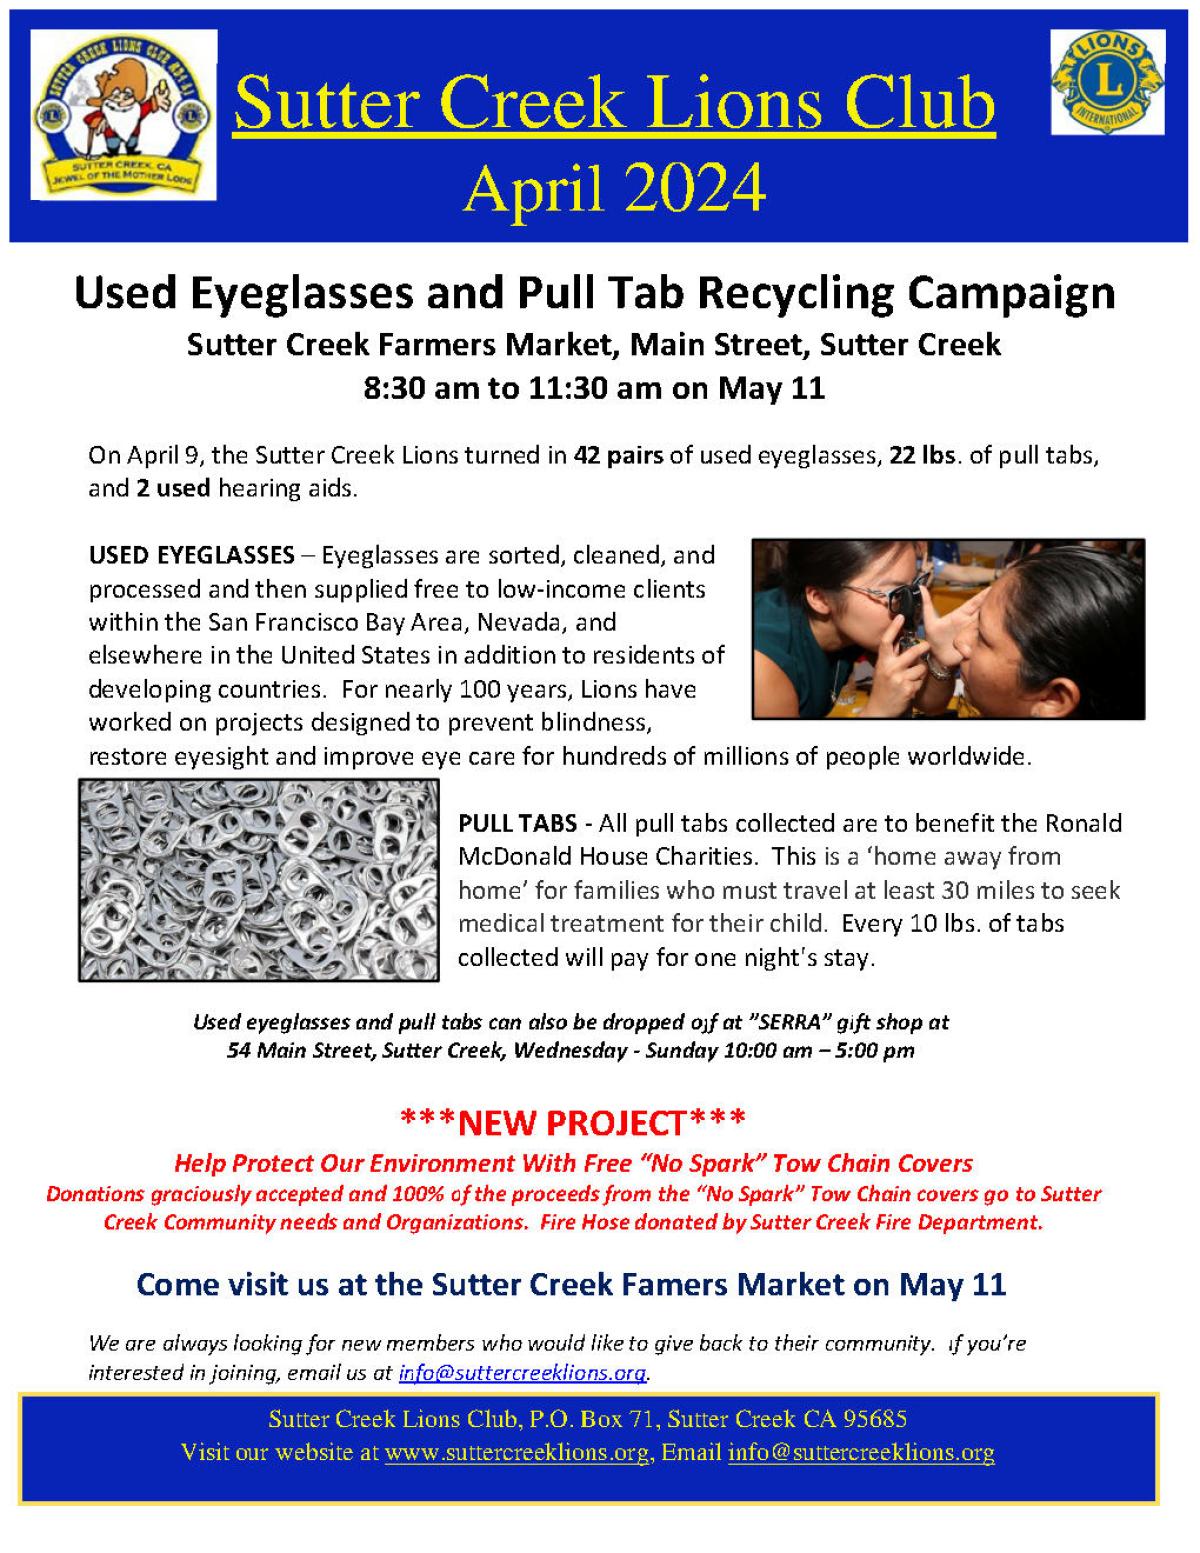 Used eyeglasses and pull-tab recycling campaign